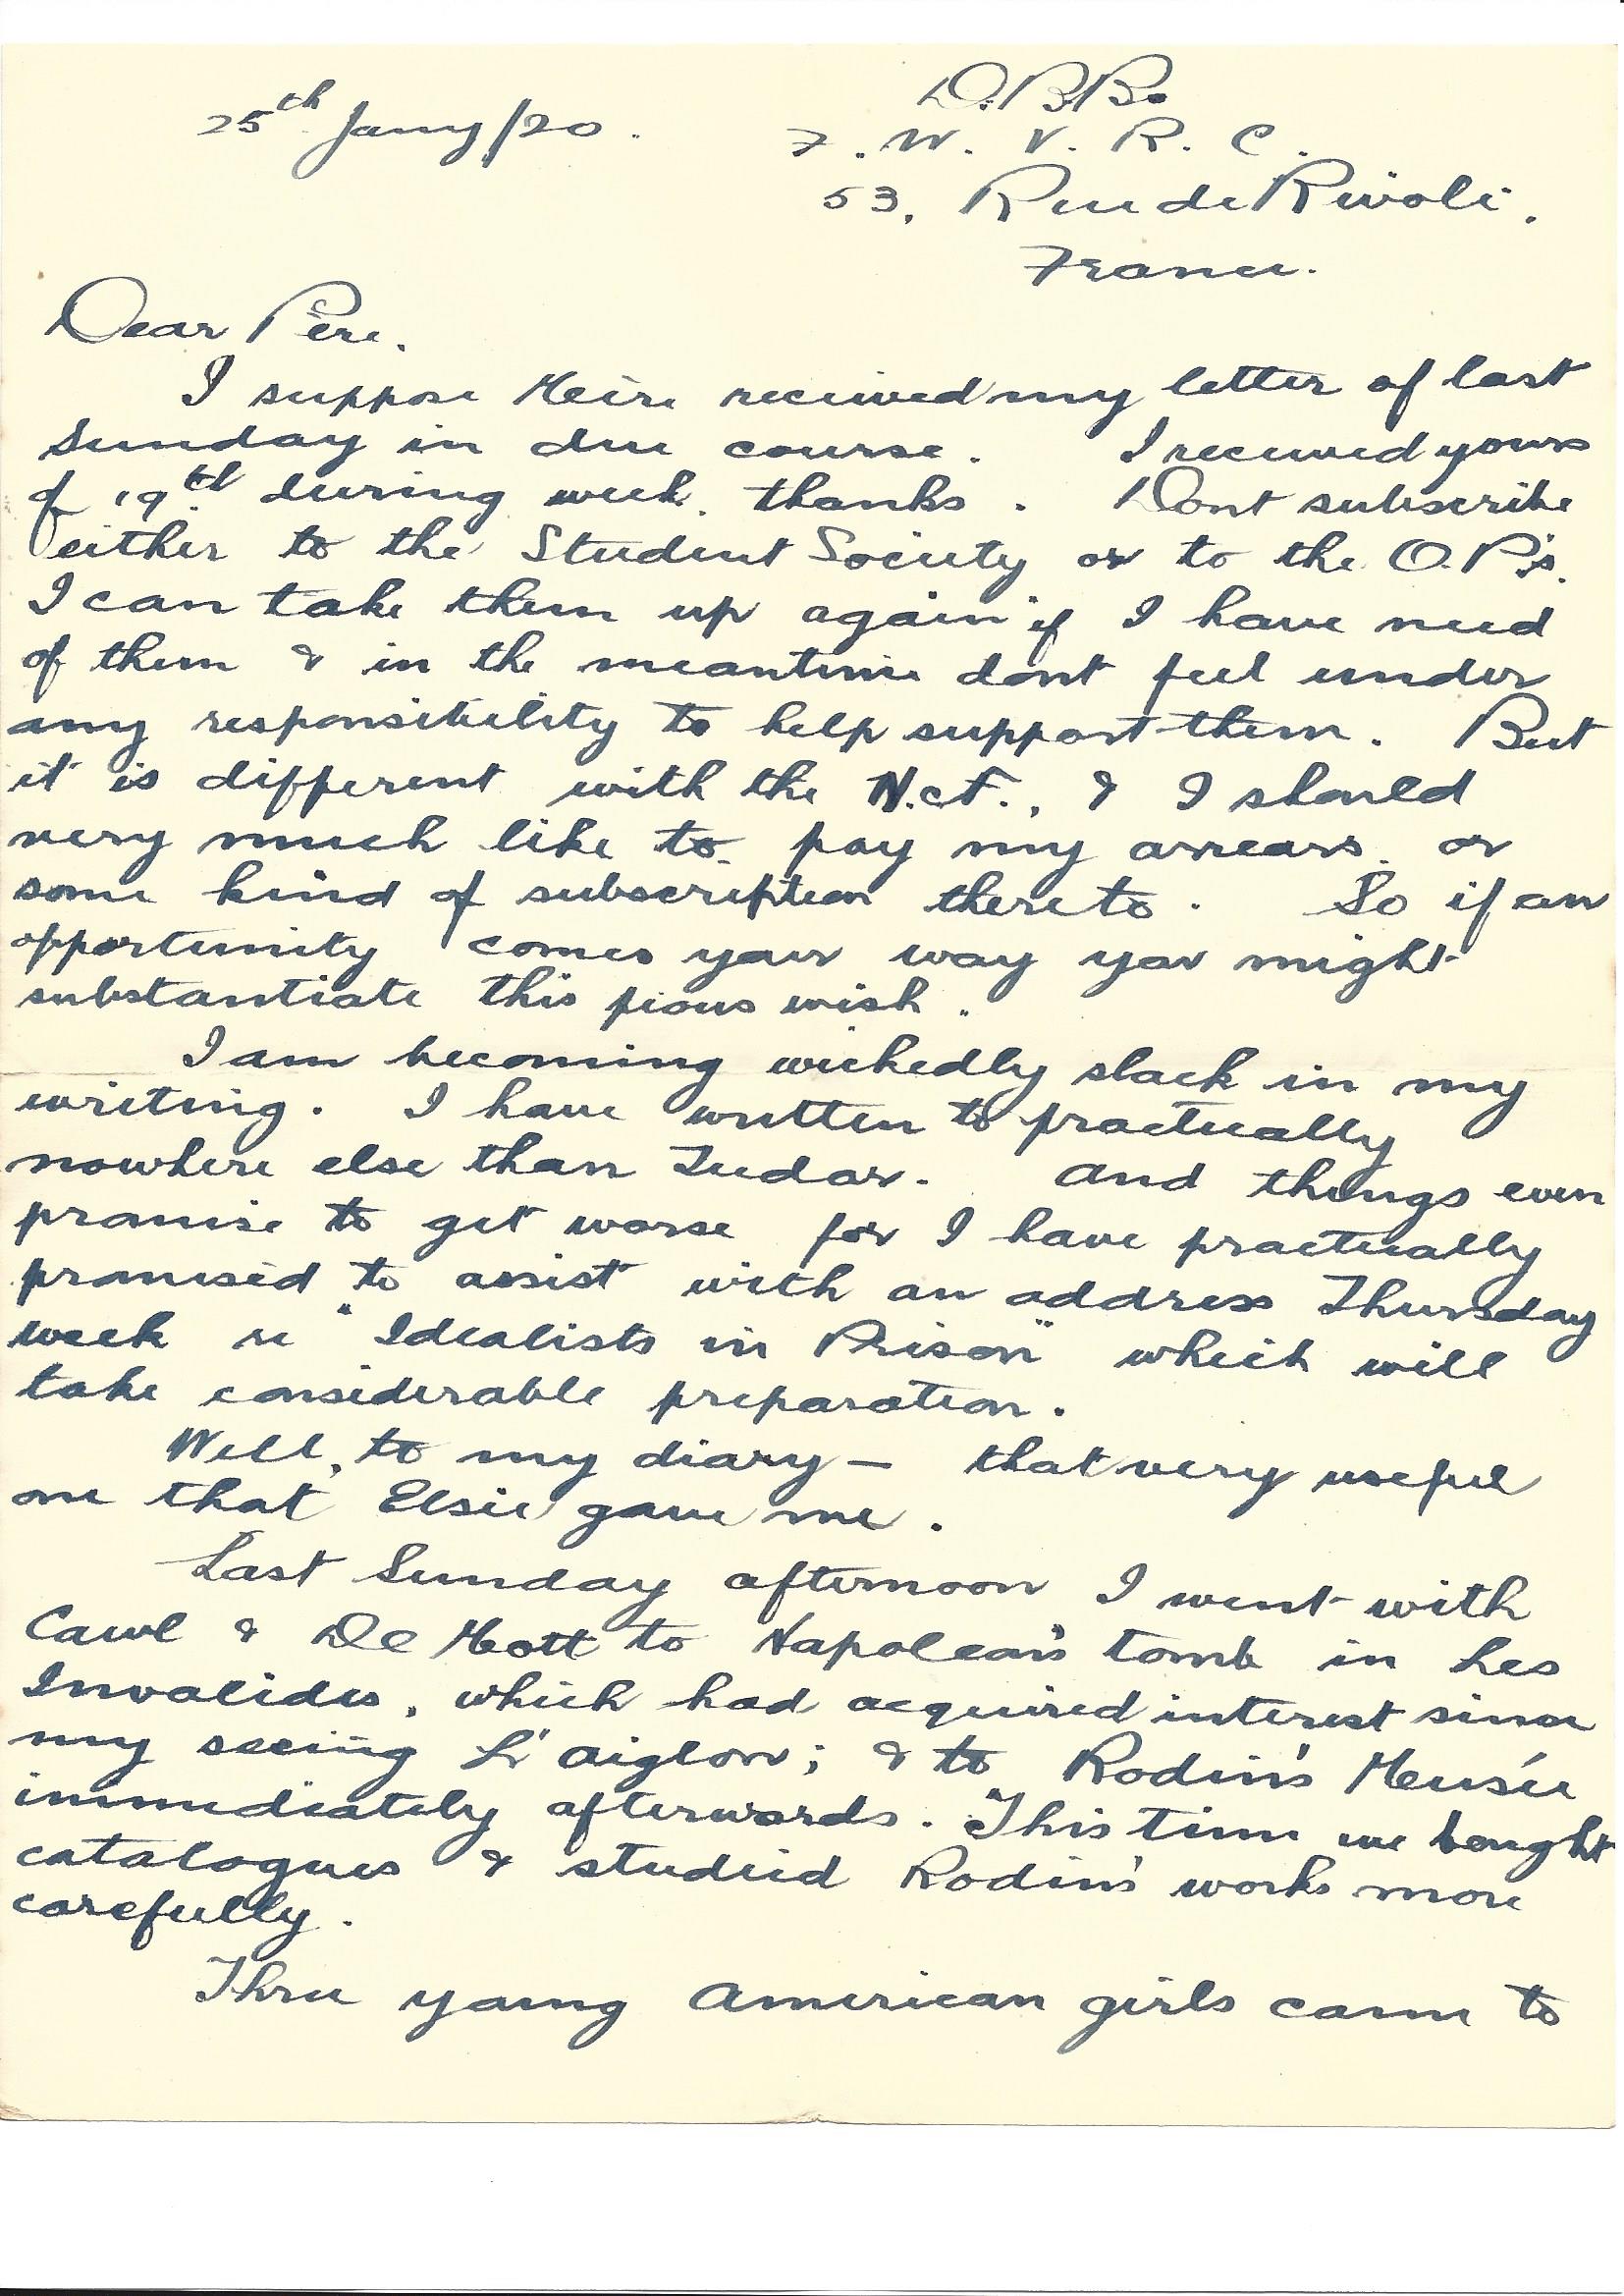 1920-01-25 page 2 letter by Donald Bearman